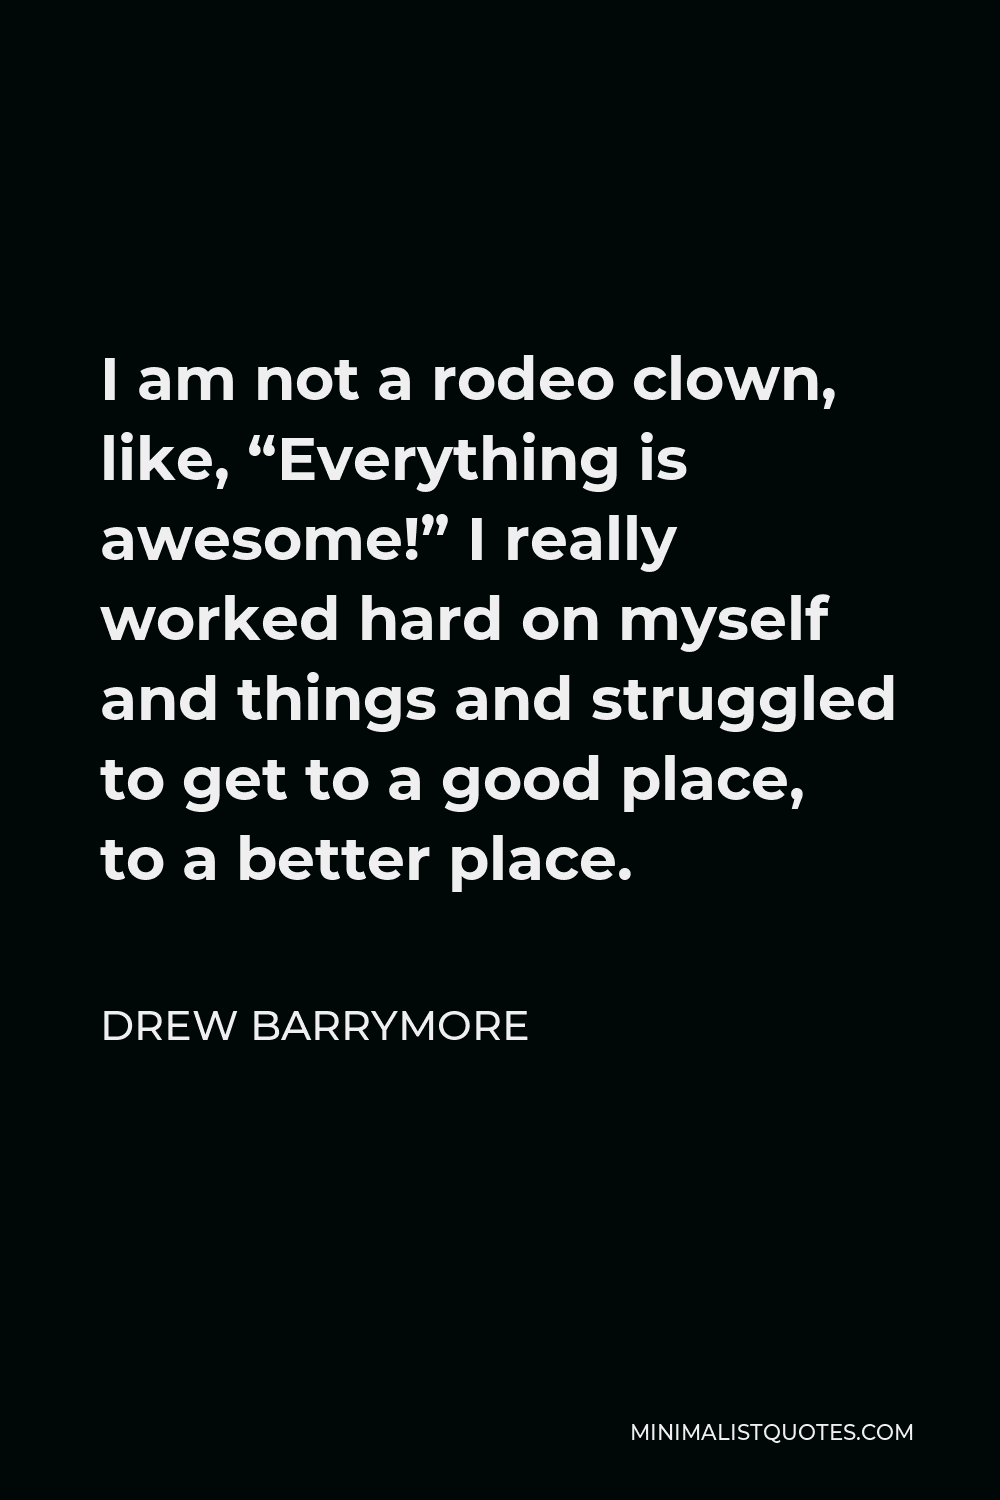 Drew Barrymore Quote - I am not a rodeo clown, like, “Everything is awesome!” I really worked hard on myself and things and struggled to get to a good place, to a better place.